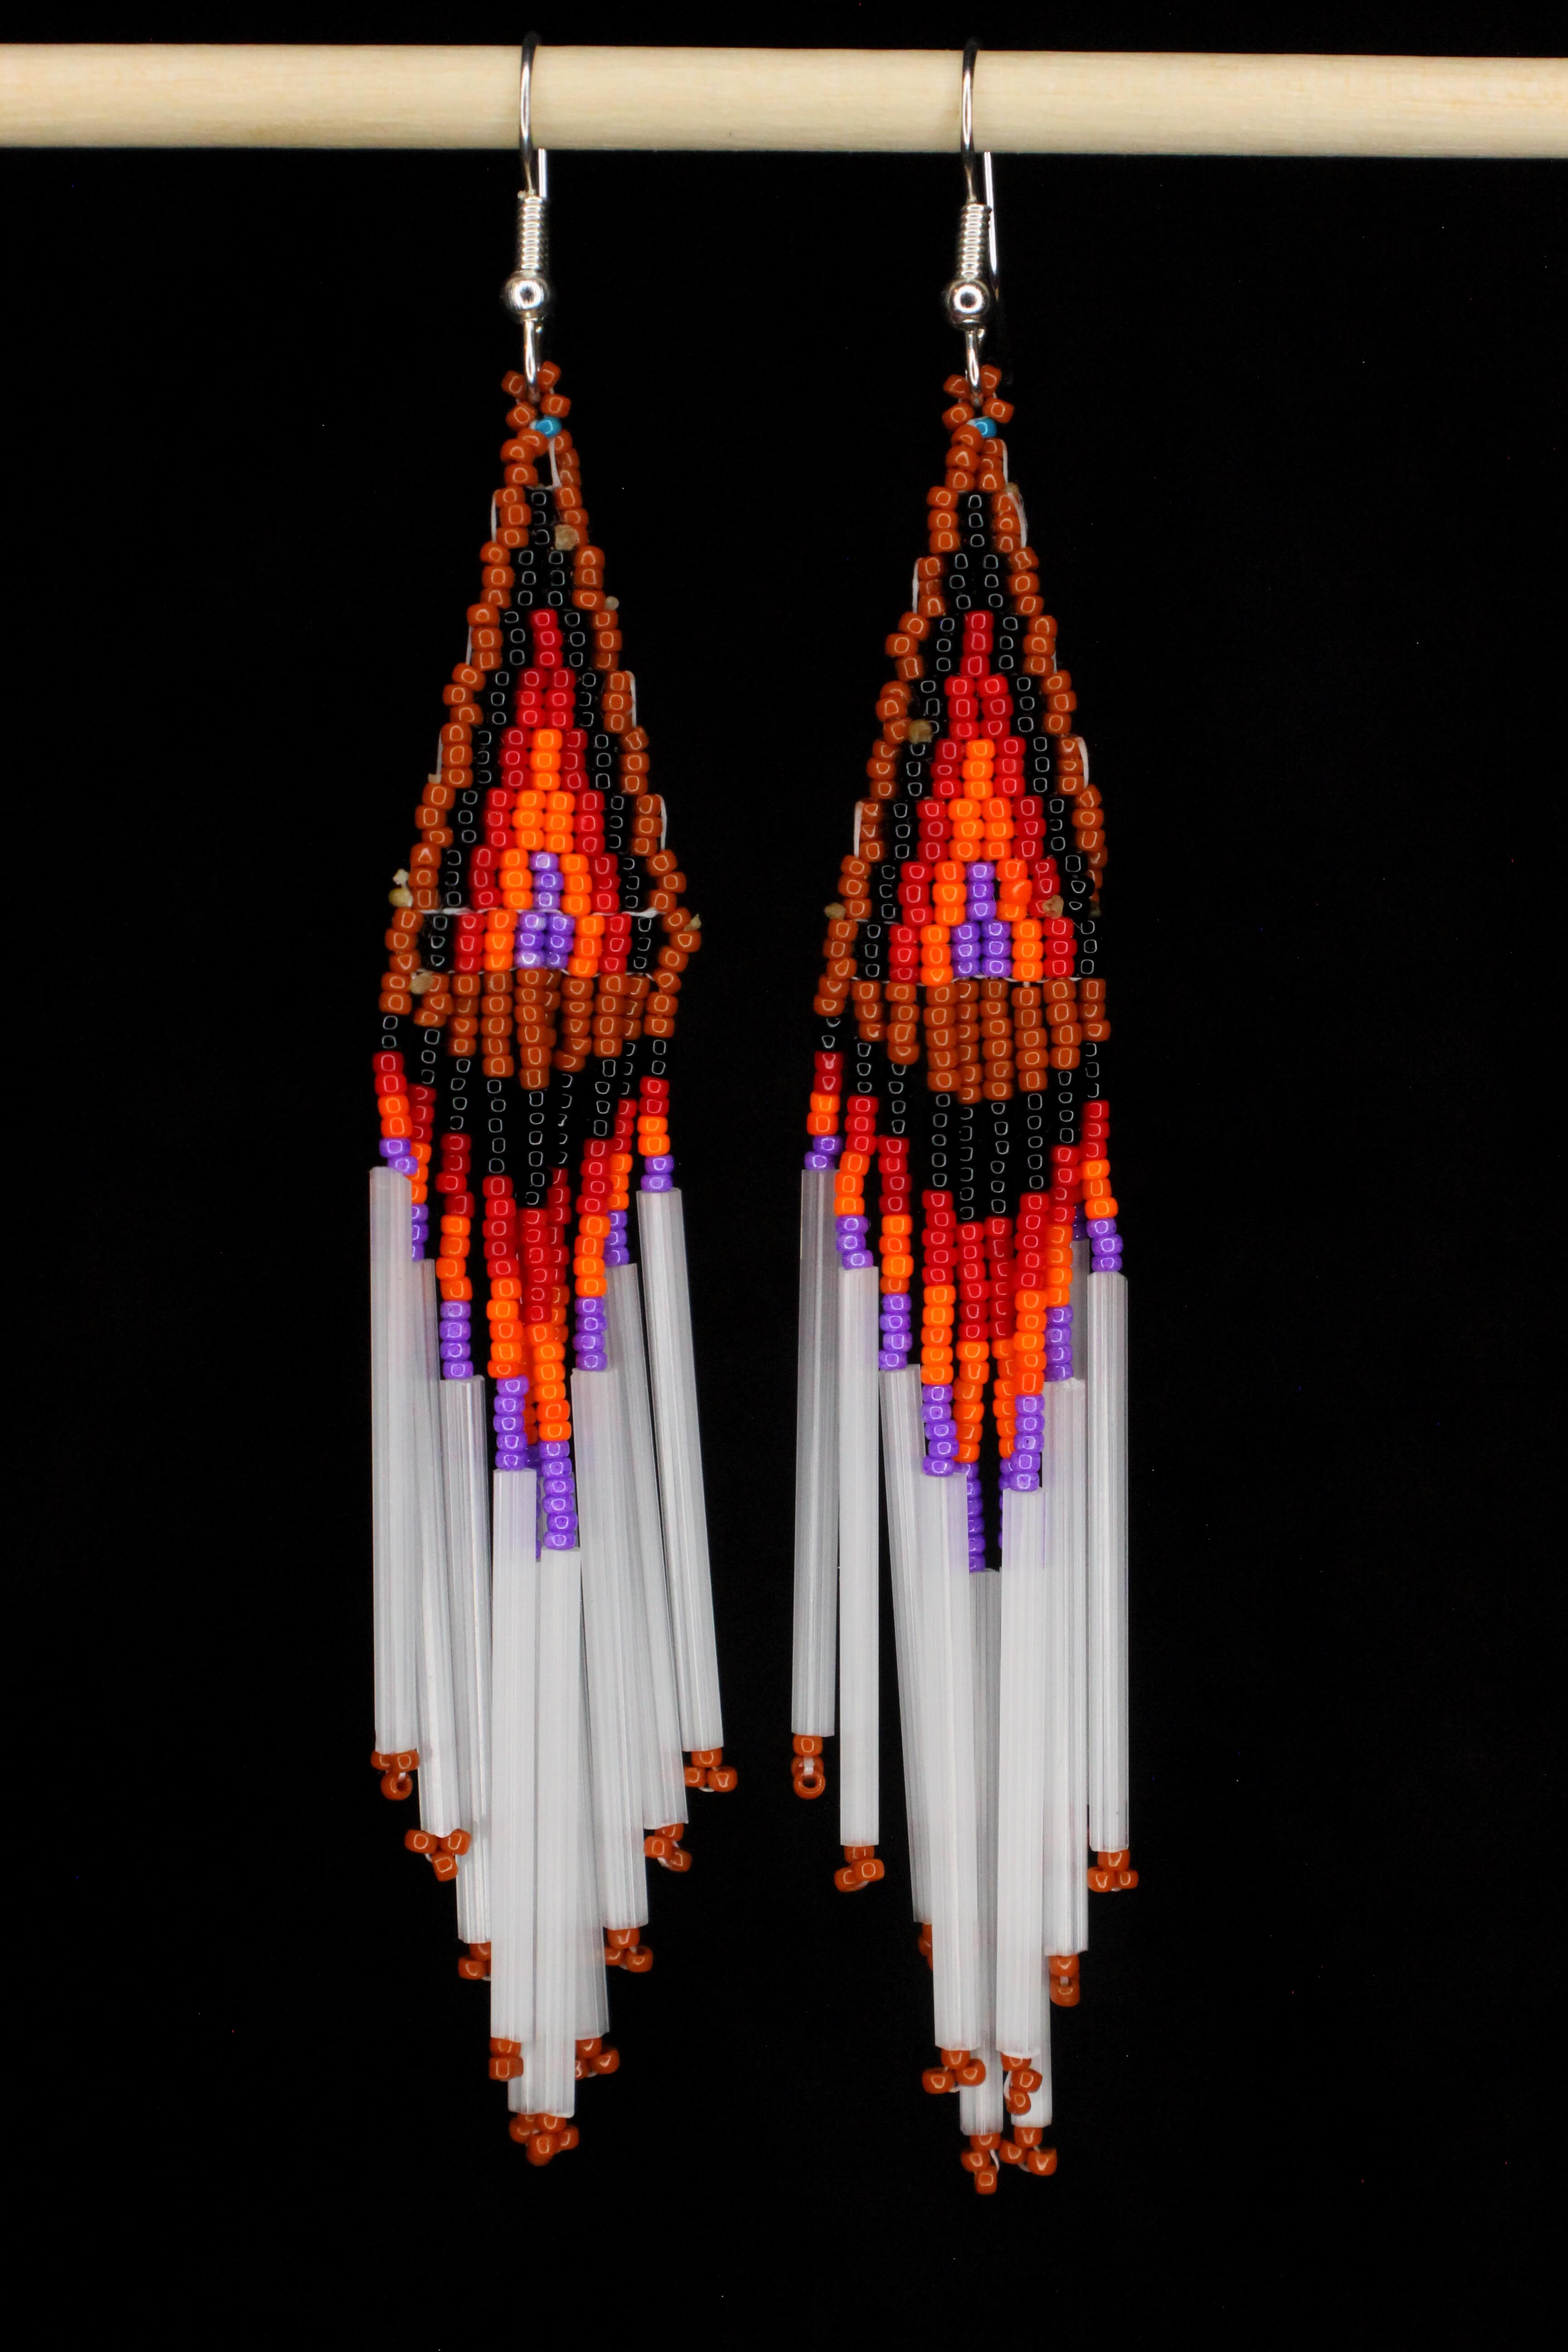 8 Things You Didn't Know About Beaded Jewelry